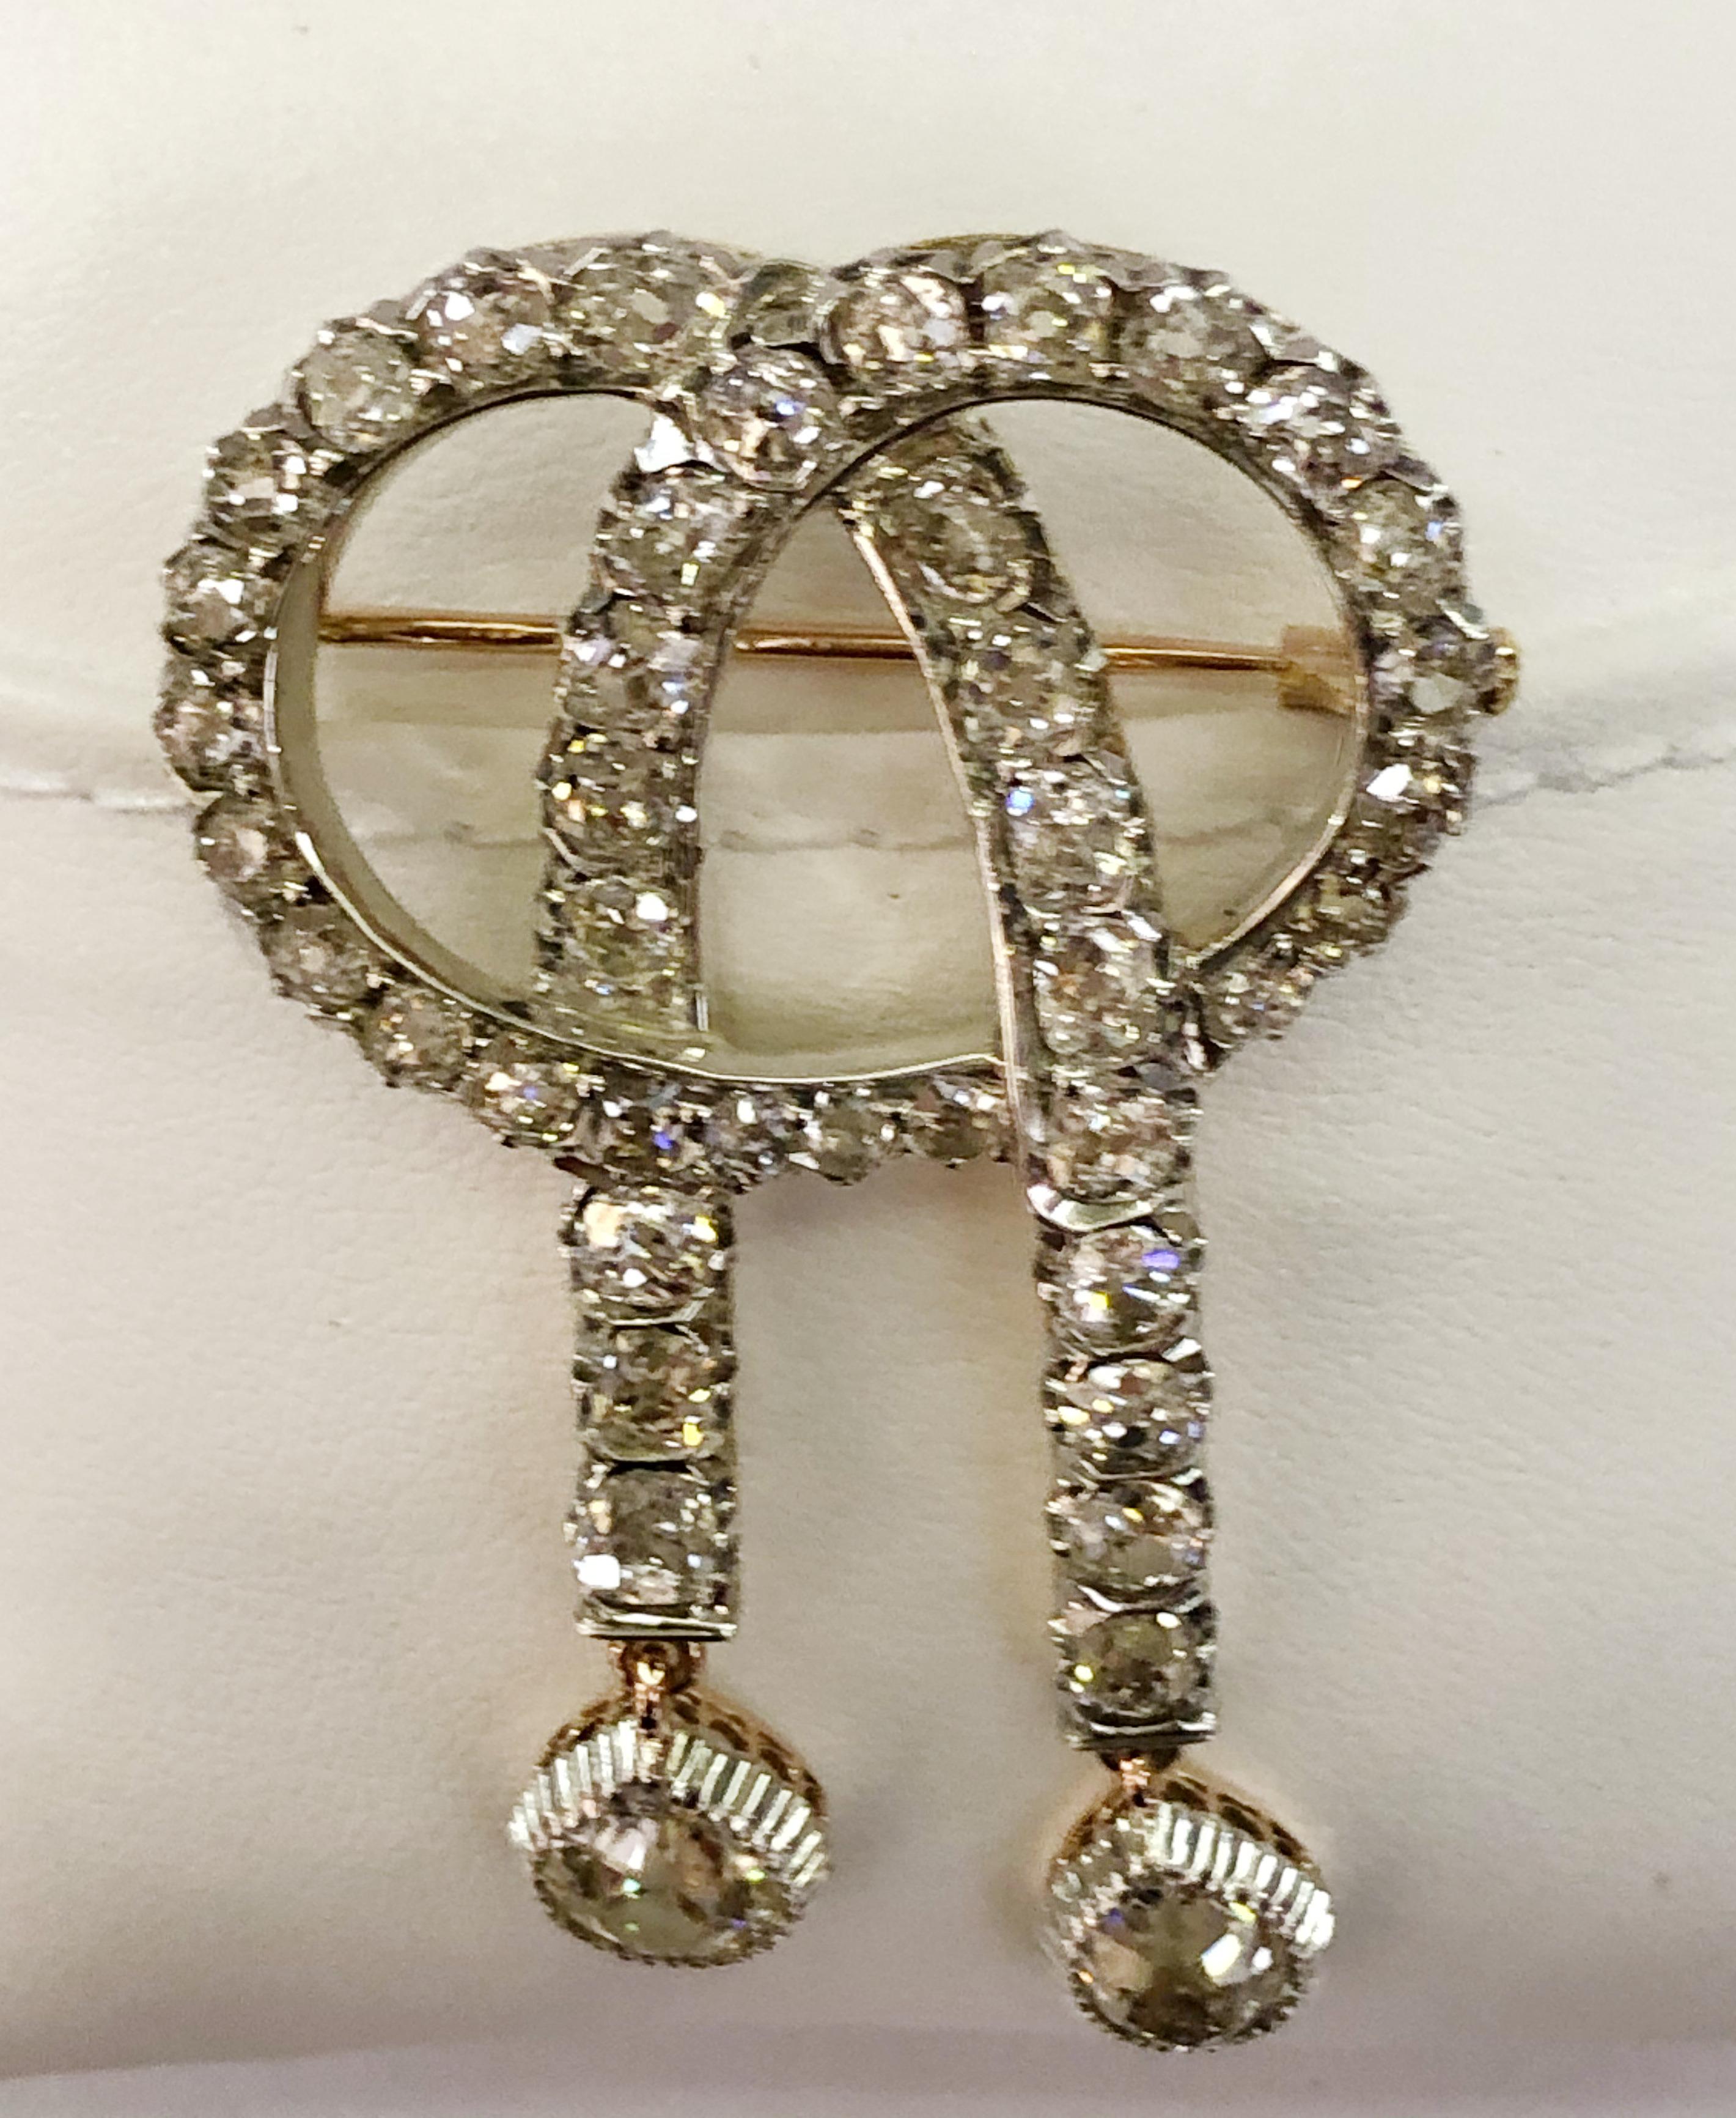 Vintage knot brooch with 18 karat yellow gold and silver, and 40 small brilliant diamonds with 2 large dangling diamonds for a total of 6 karats, Italy 1910-1930s
Length 6cm, width 3cm